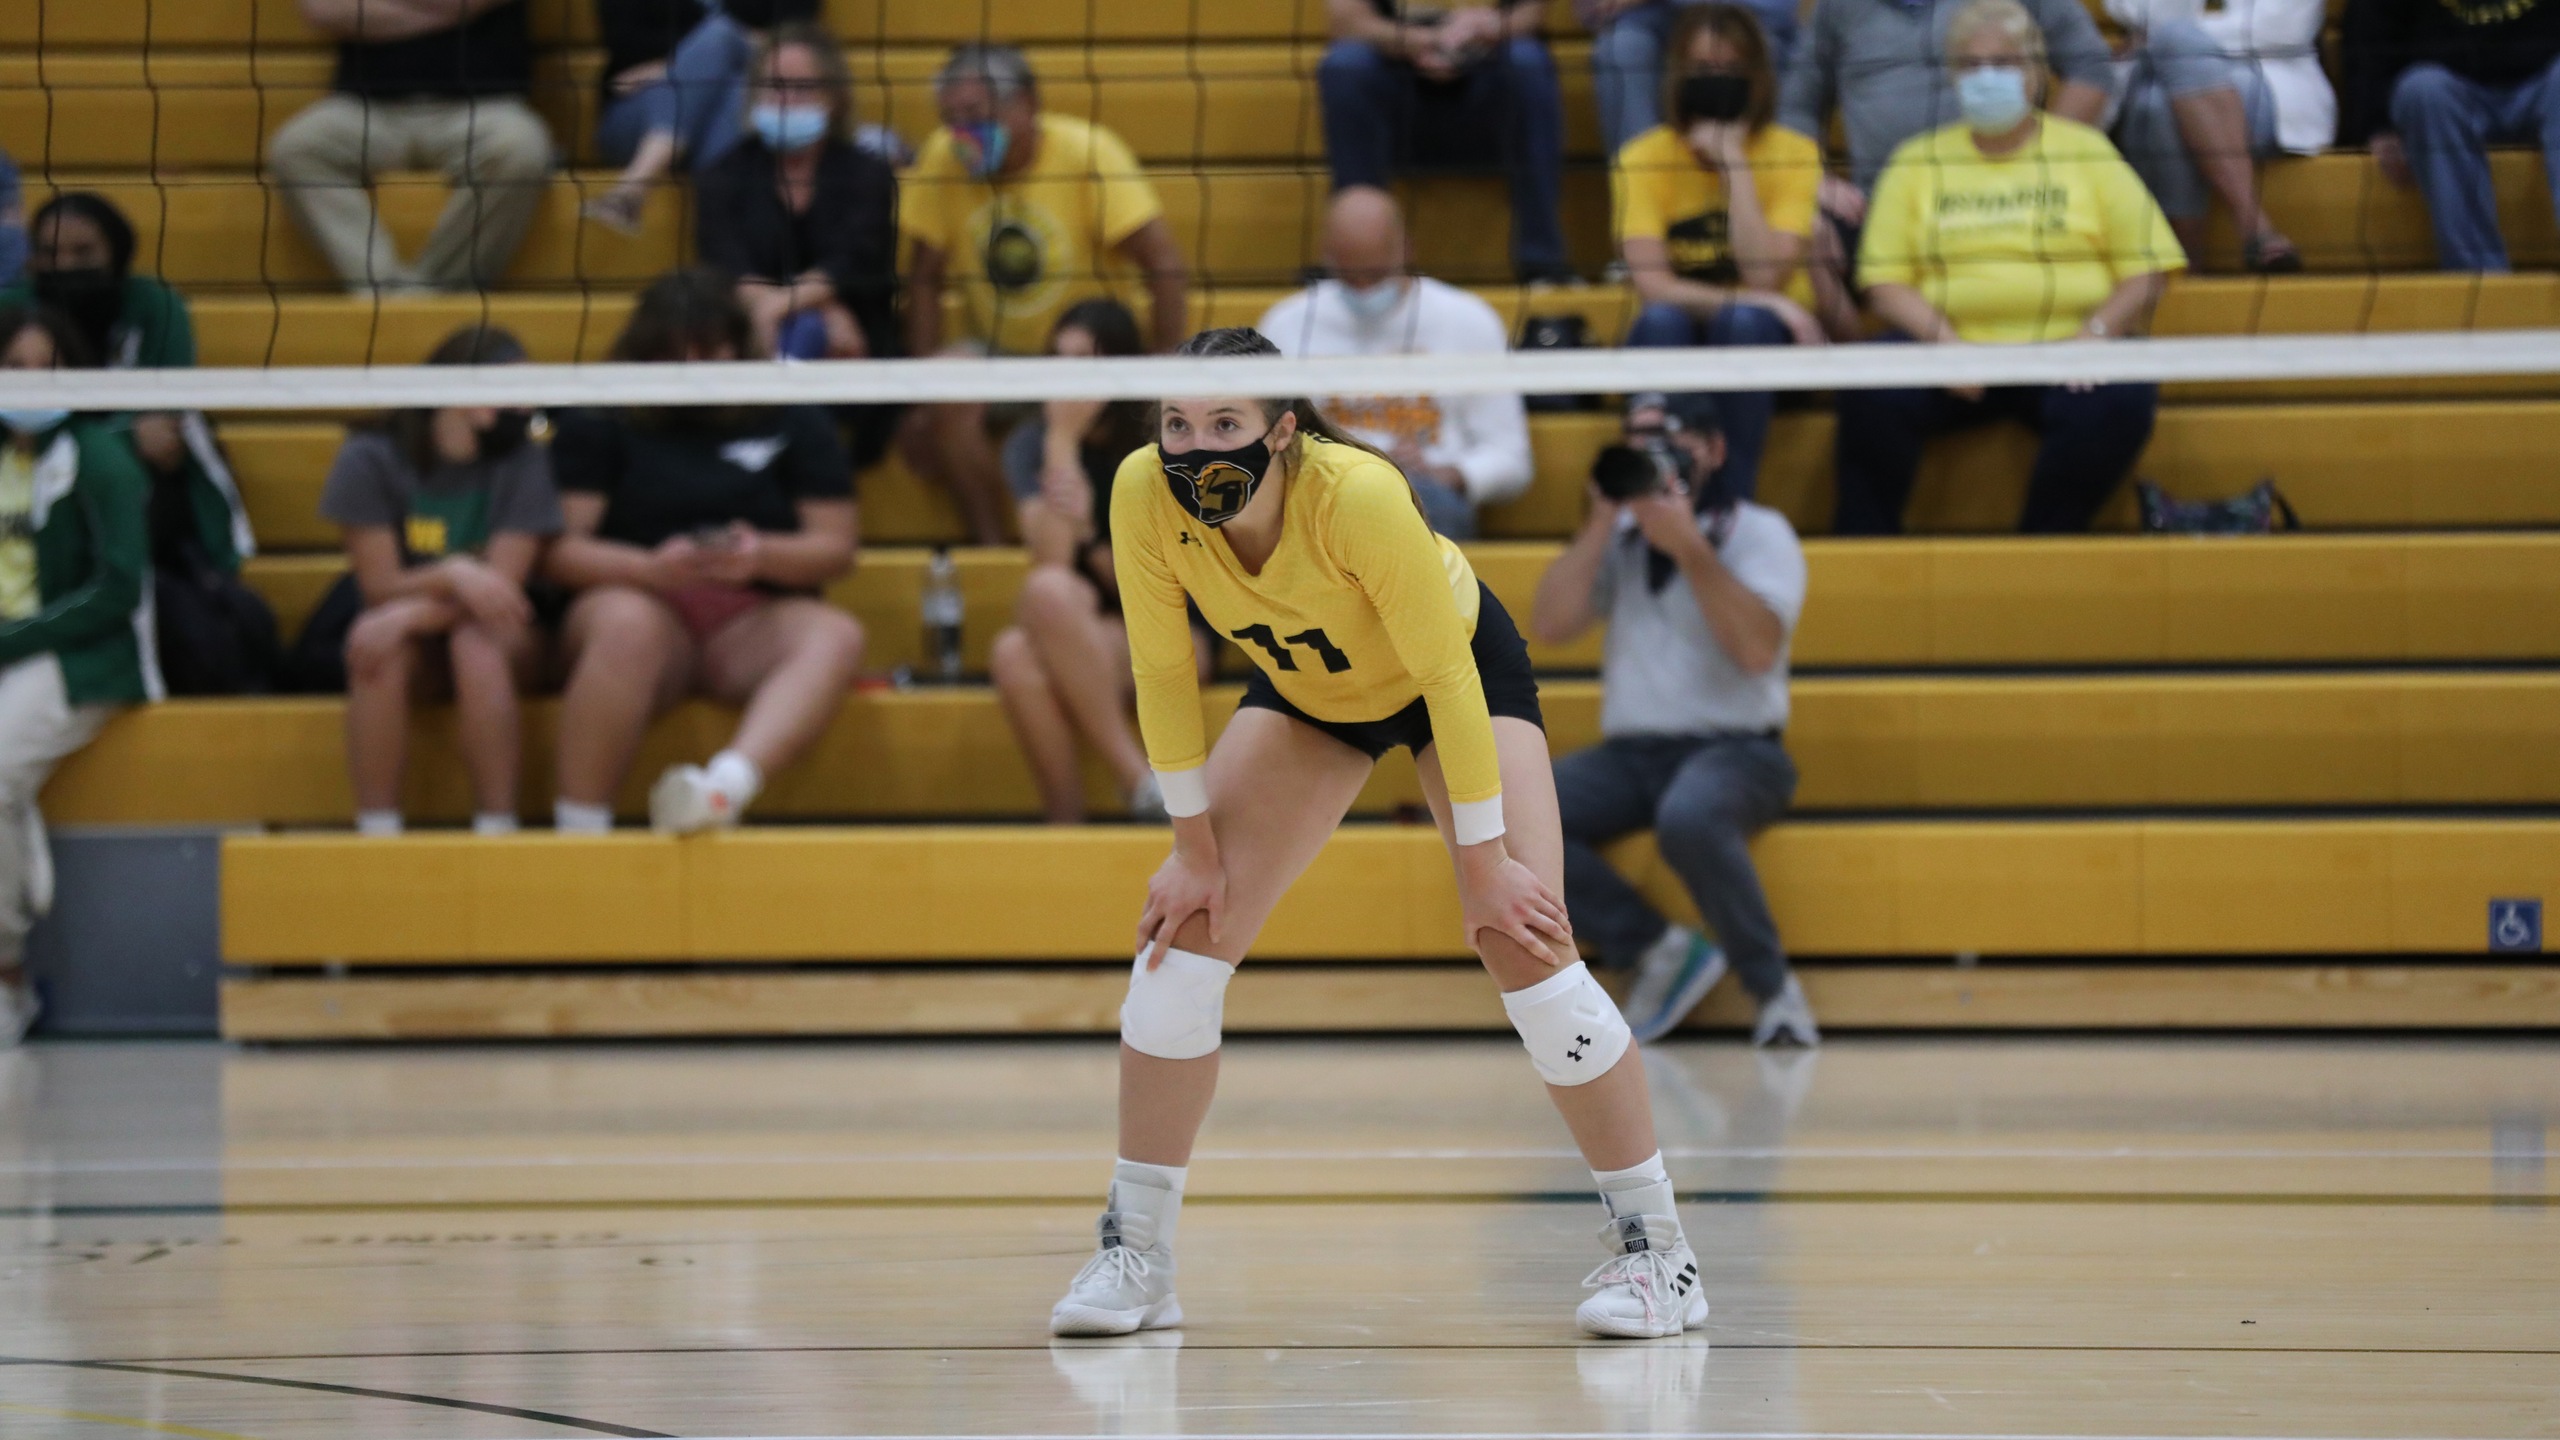 Riley Kindt recorded season bests with her .571 hitting percentage and 18 kills against the Gusties.